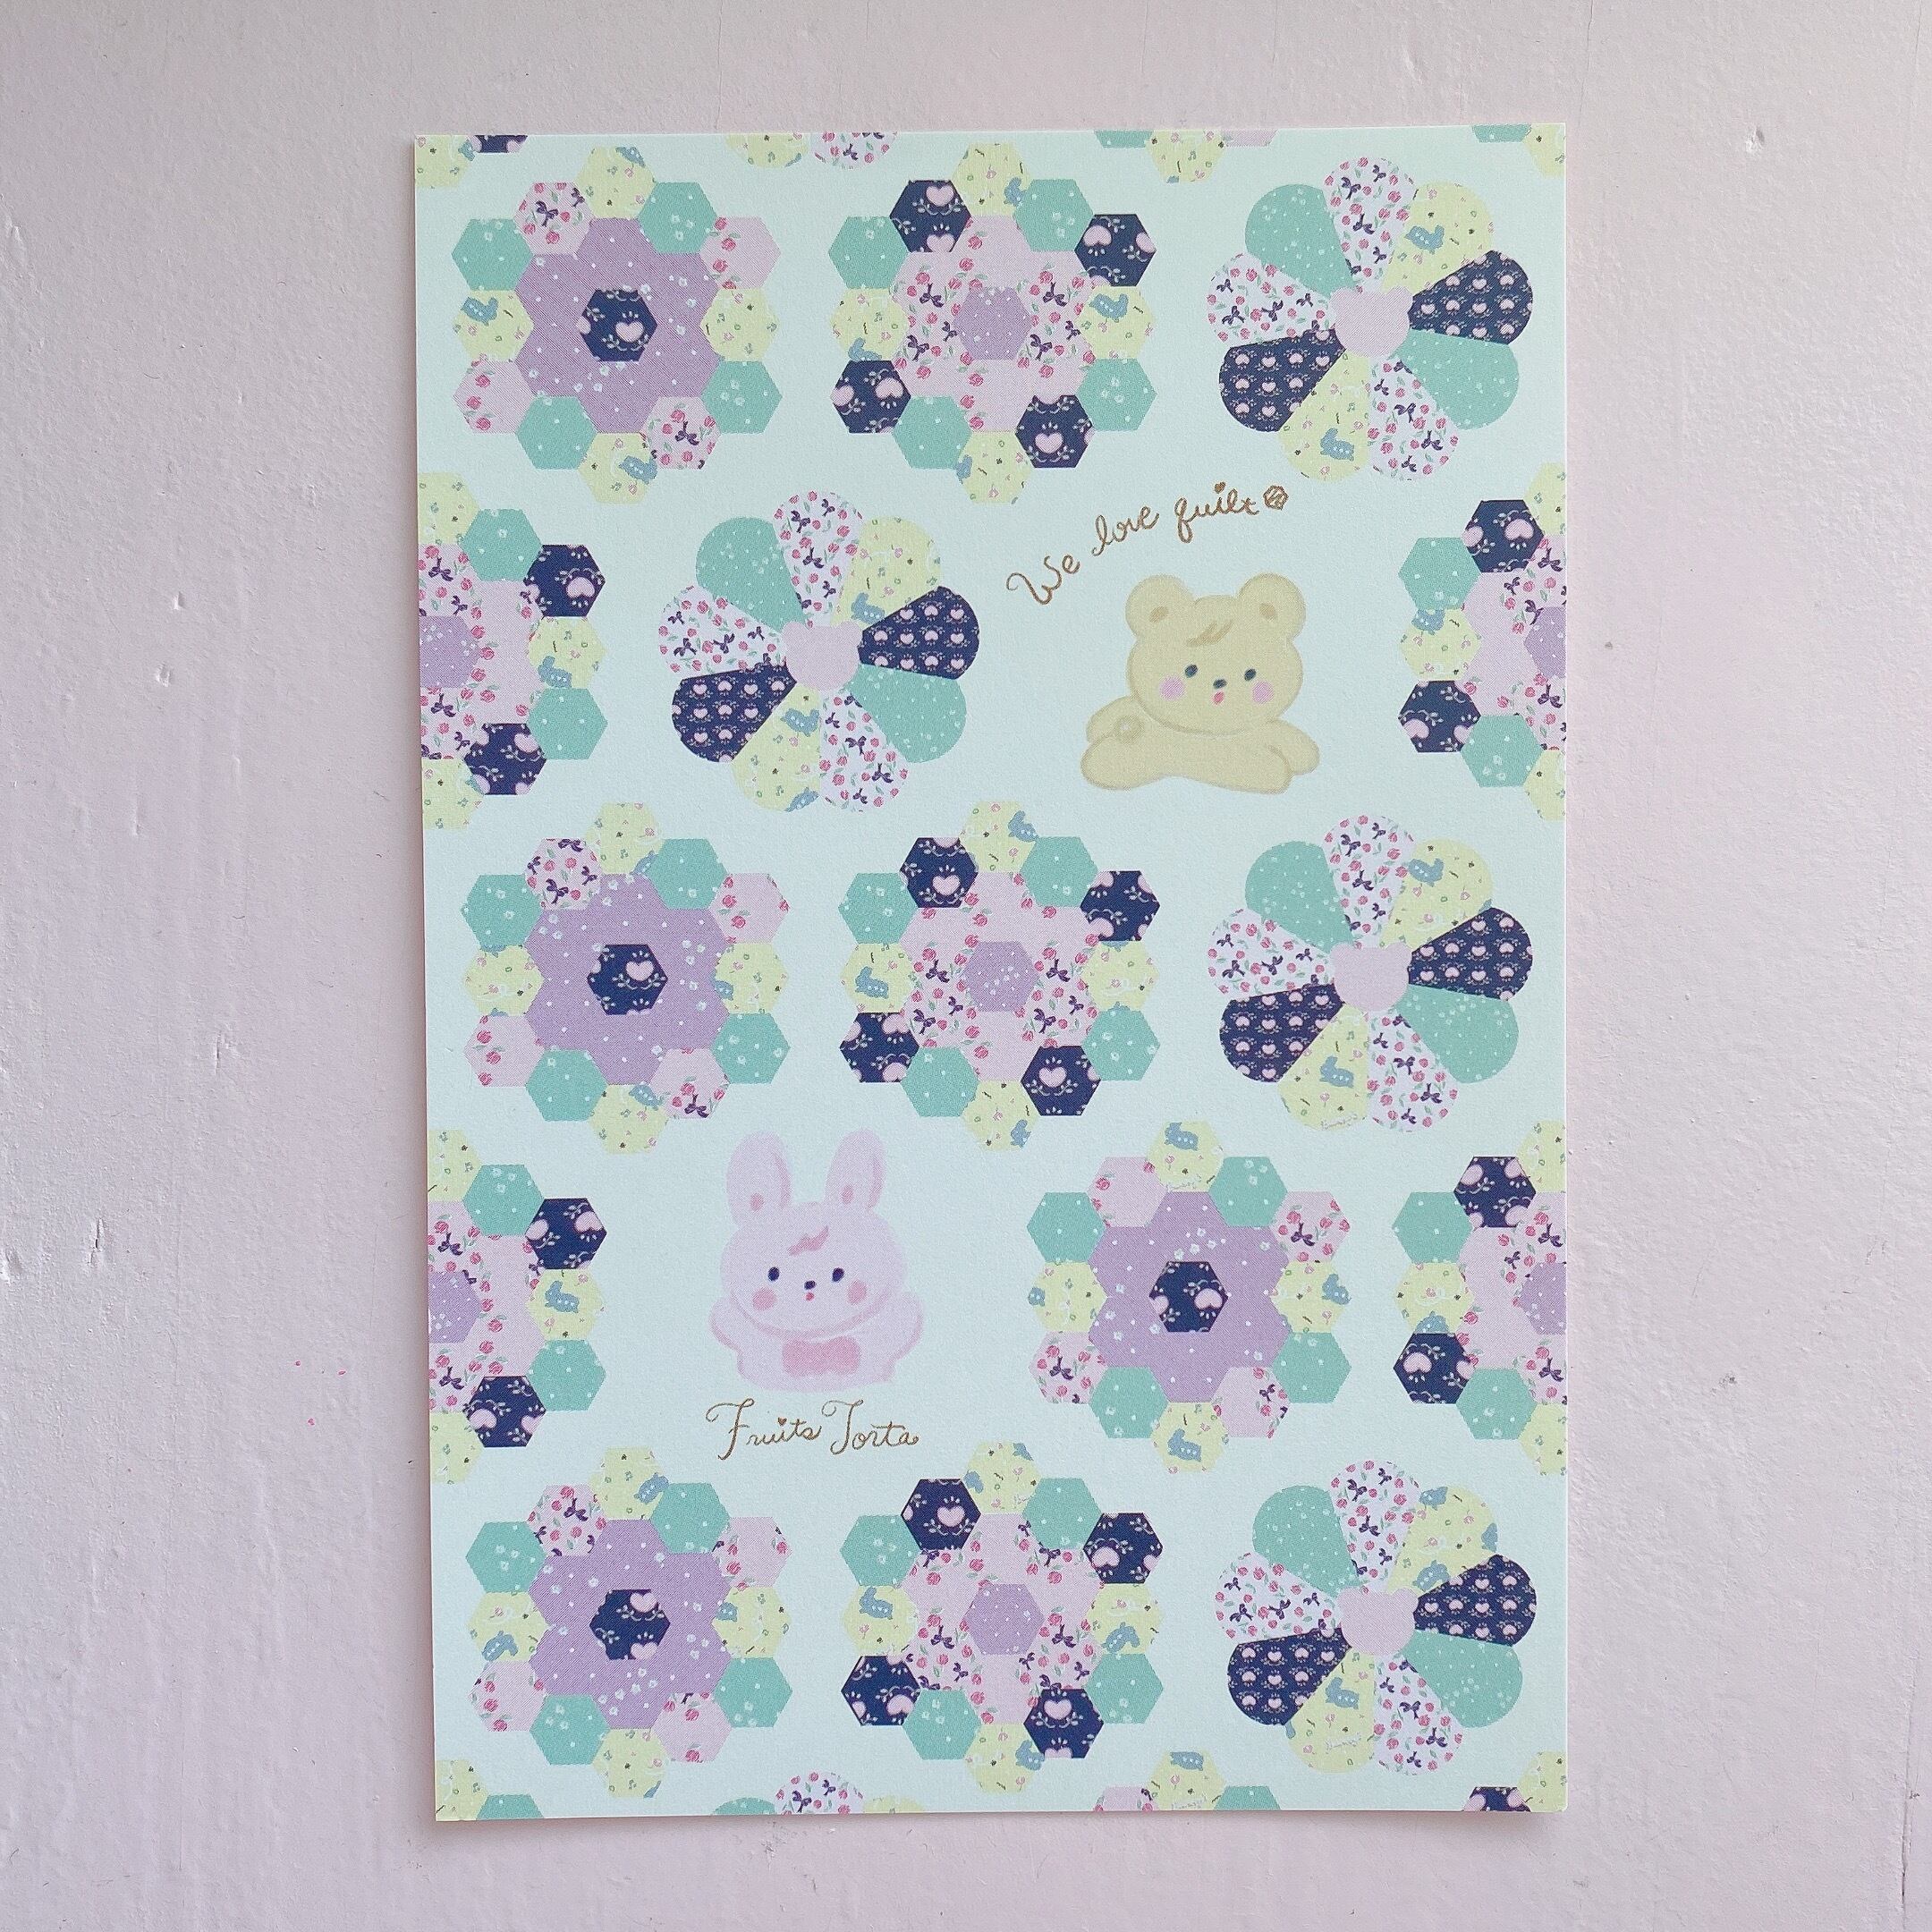 My quilt with animals Postercard